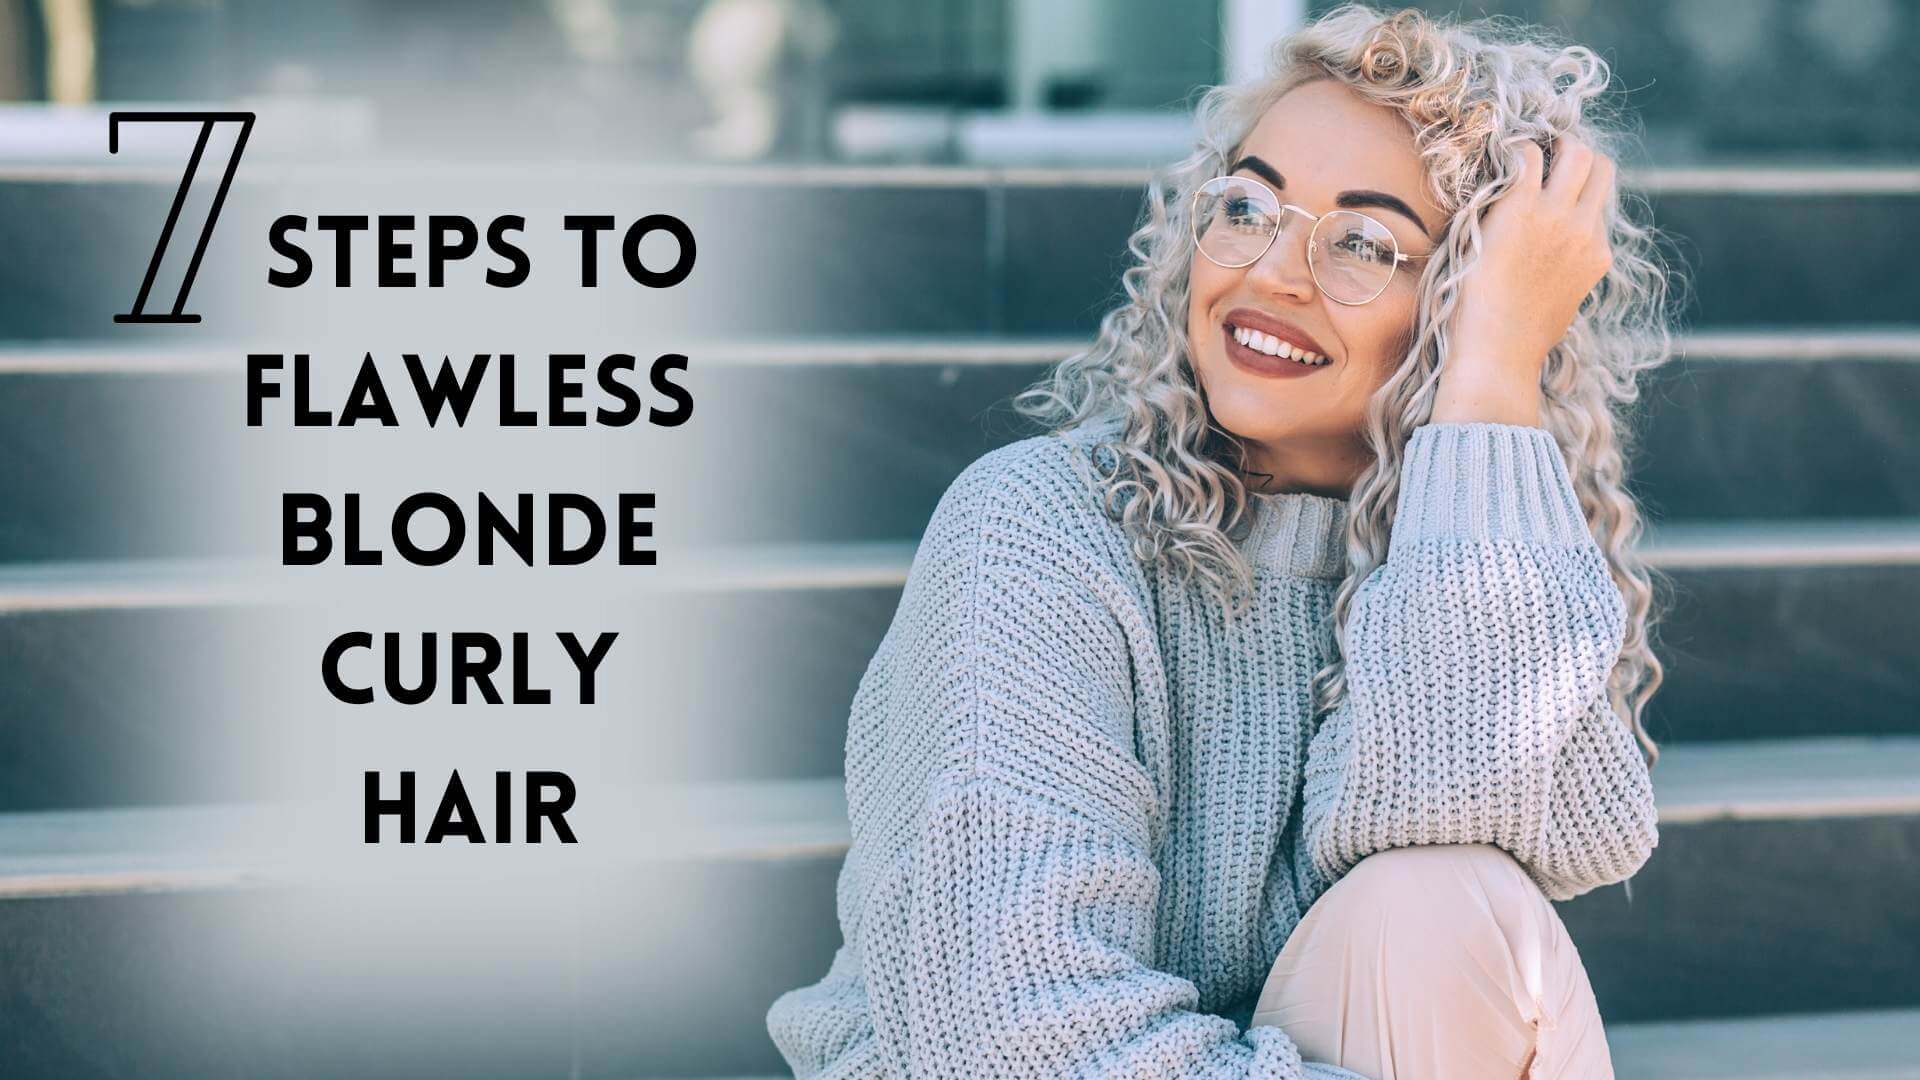 7 Steps To Flawless Blonde Curly Hair